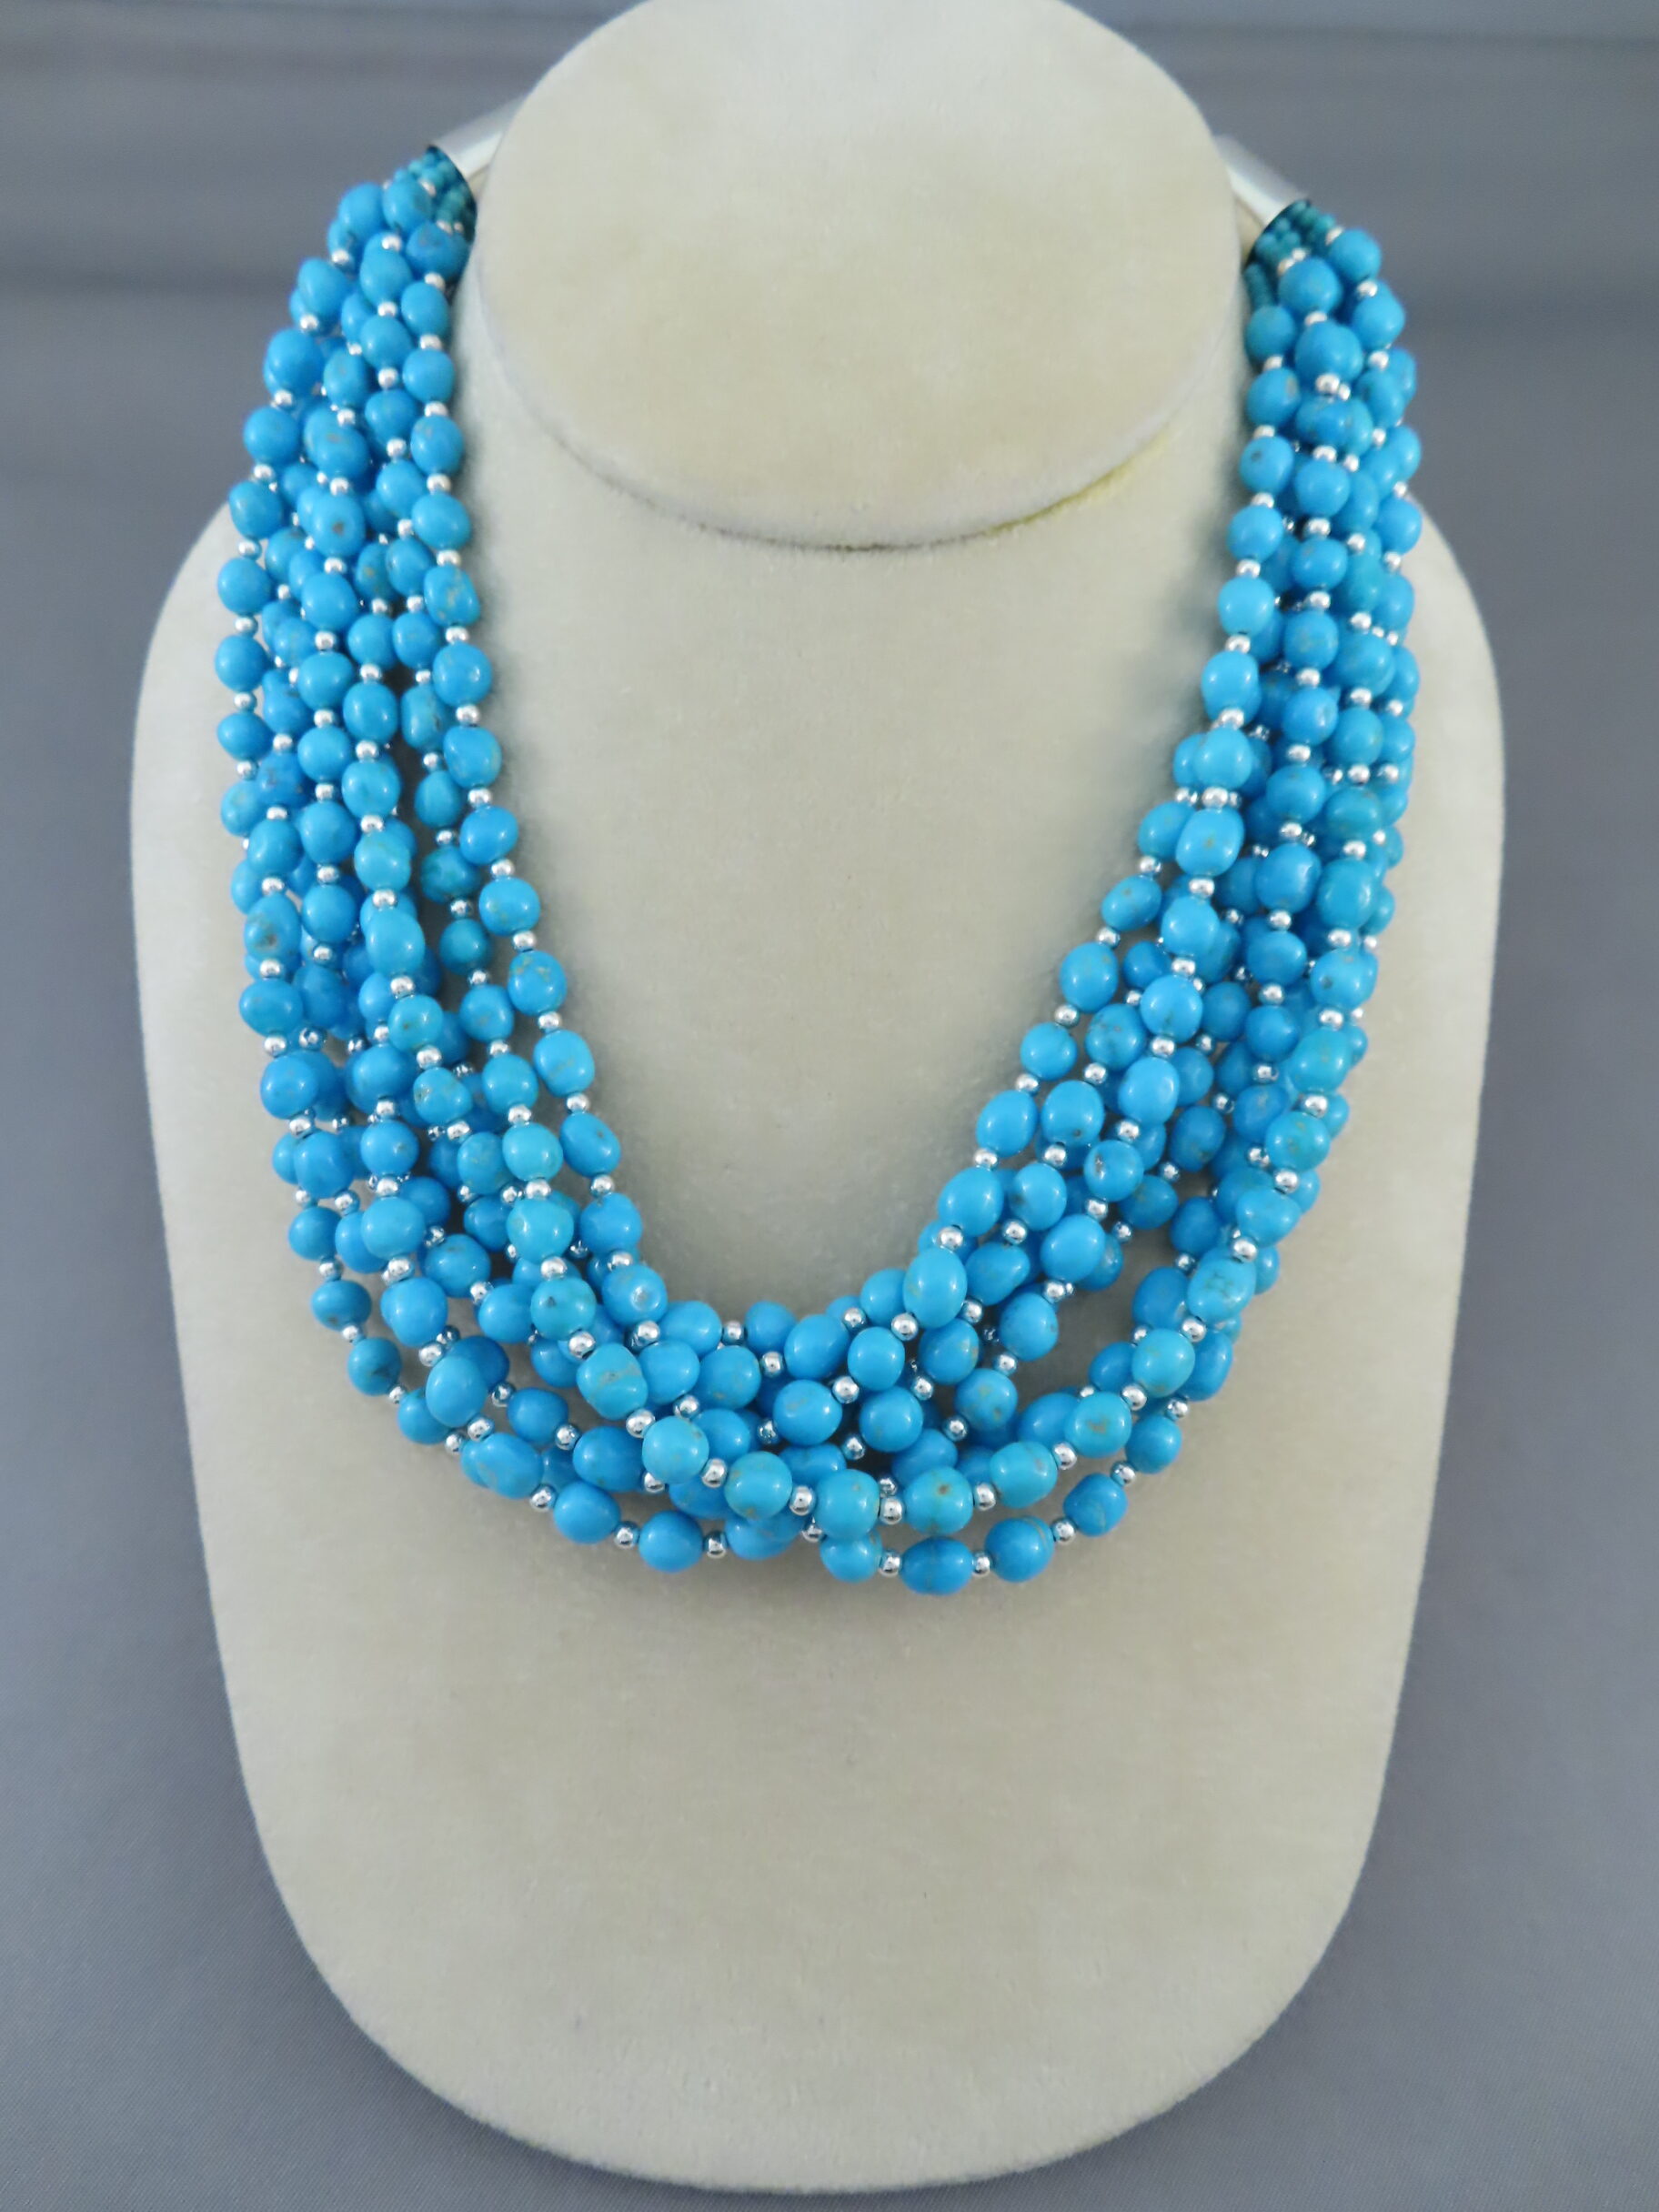 Full 10-Strand Sleeping Beauty Turquoise Necklace by Native American Navajo Indian jewelry artist, Desiree Yellowhorse $2,200- FOR SALE